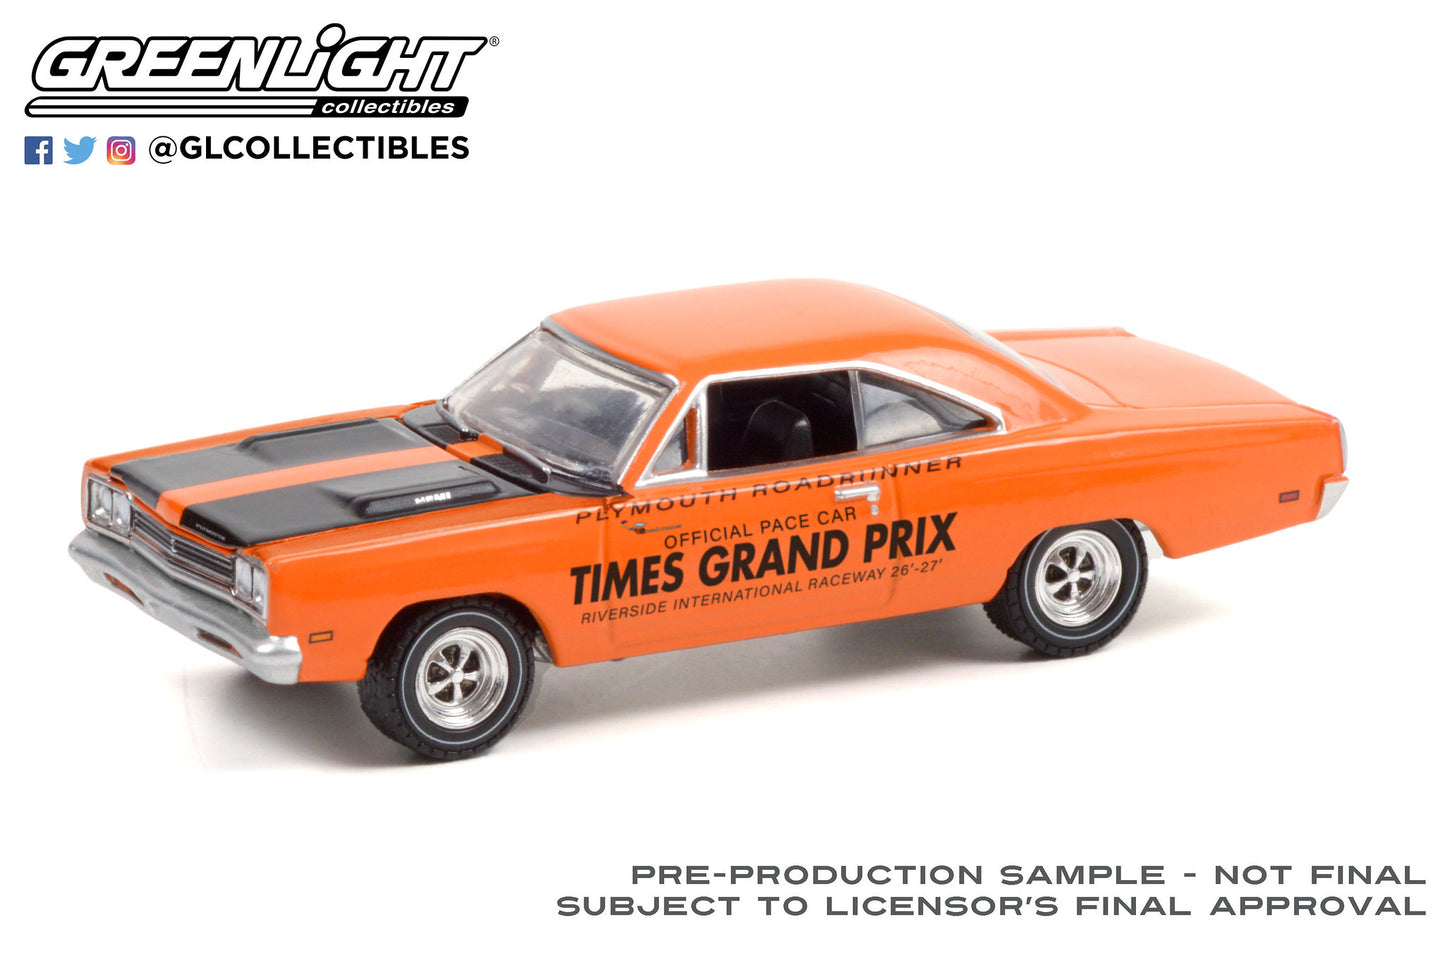 GreenLight 1:64 1969 Plymouth Road Runner - 1968 Los Angeles Times Grand Prix at Riverside International Raceway Official Pace Car 30273